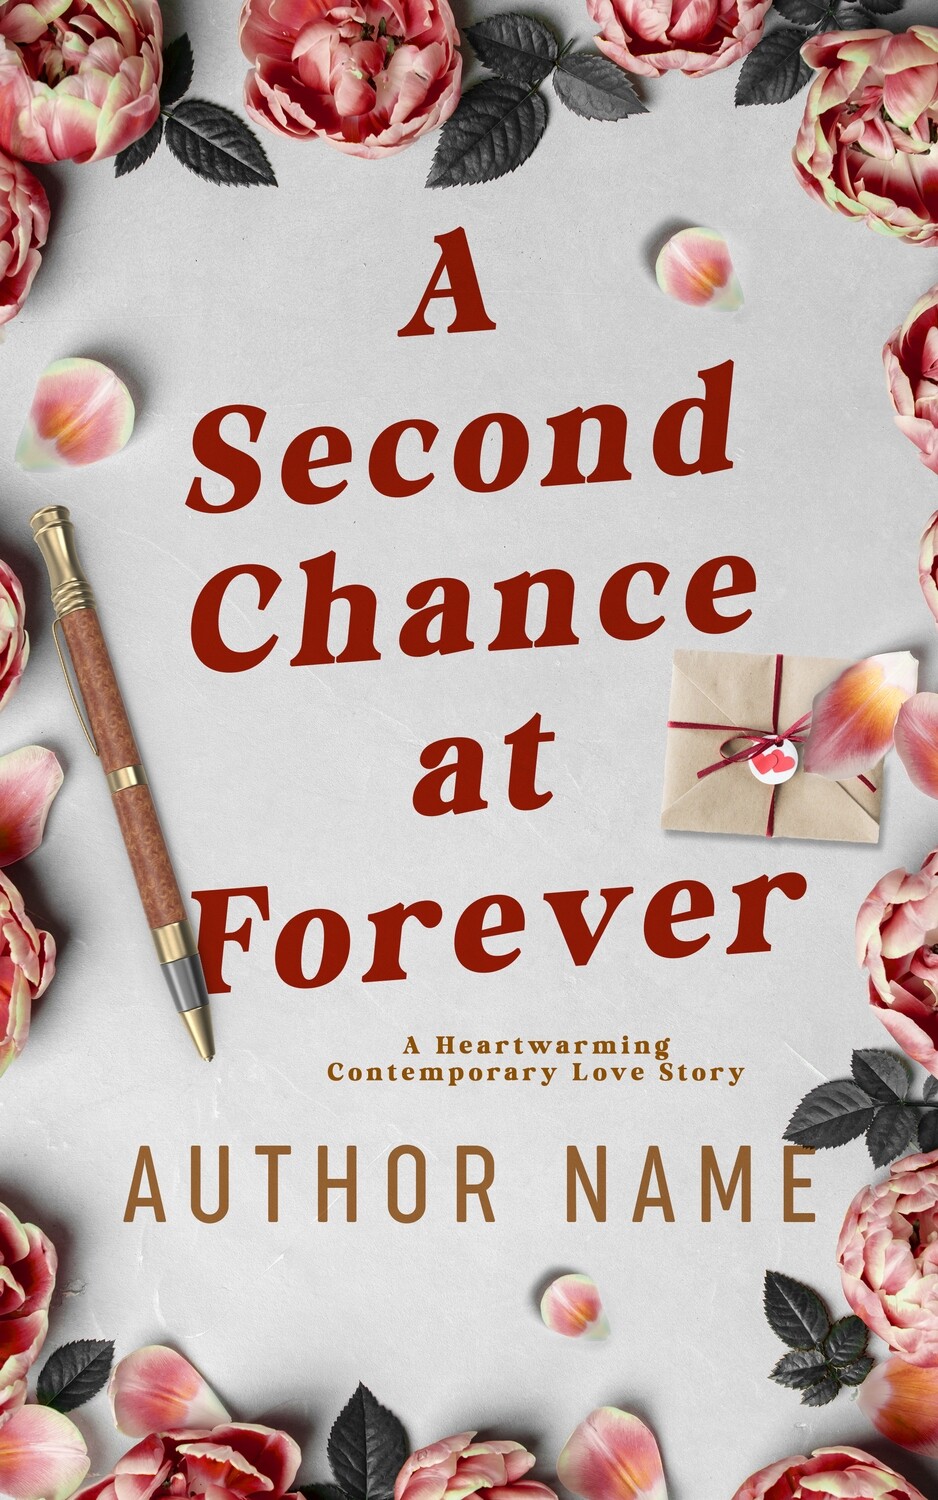 A SECOND CHANCE AT FOREVER